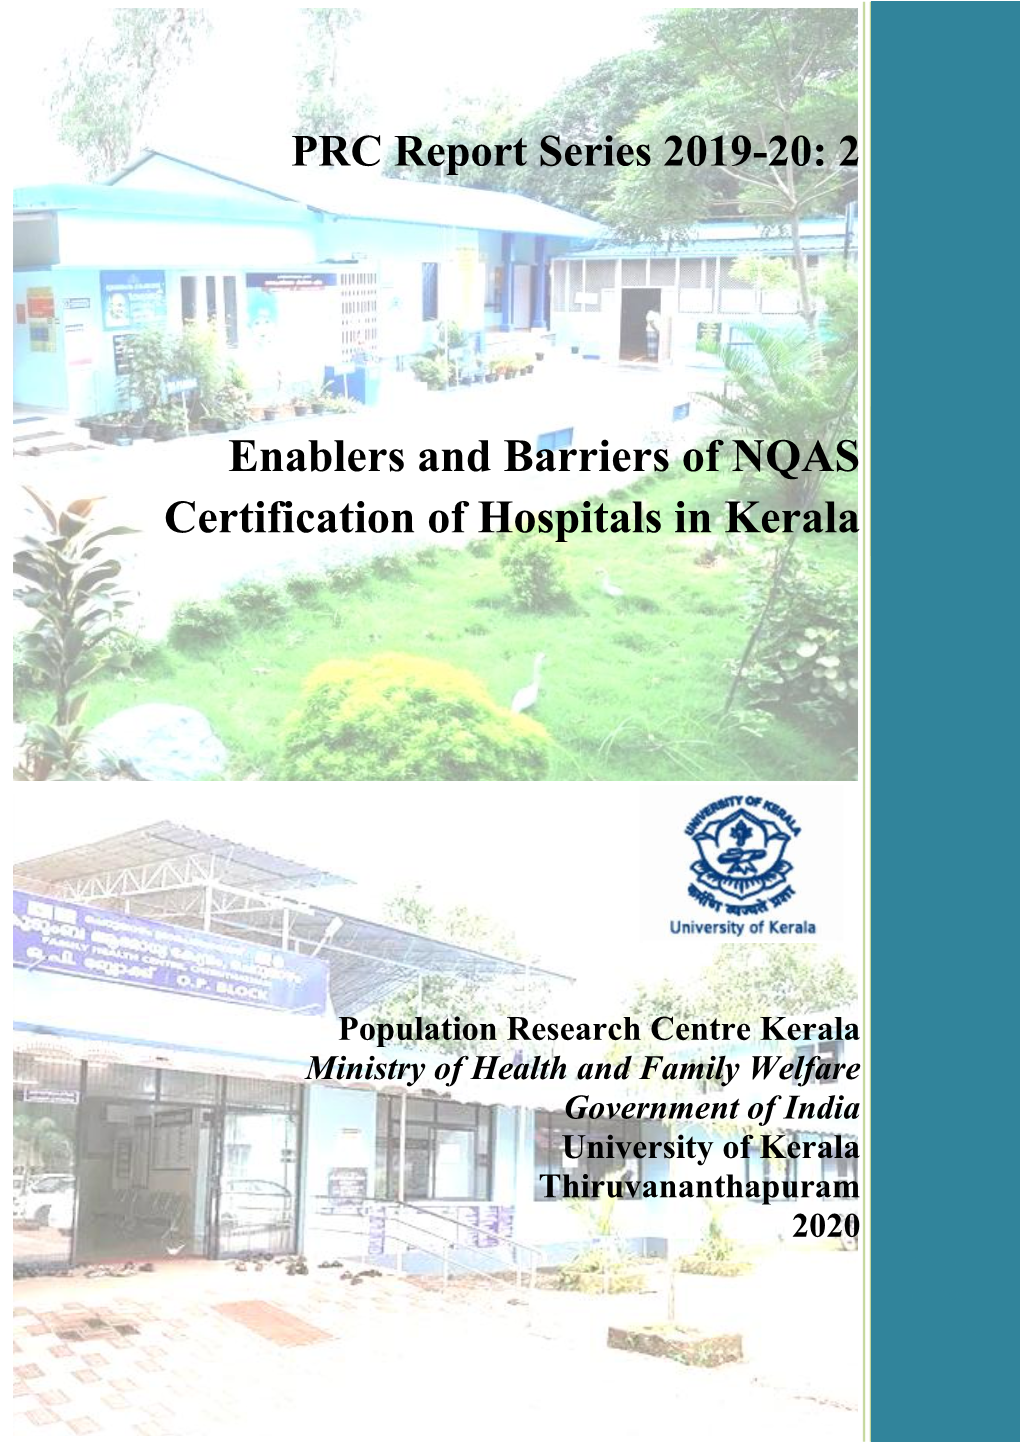 Enablers and Barriers of NQAS Certification of Hospitals in Kerala